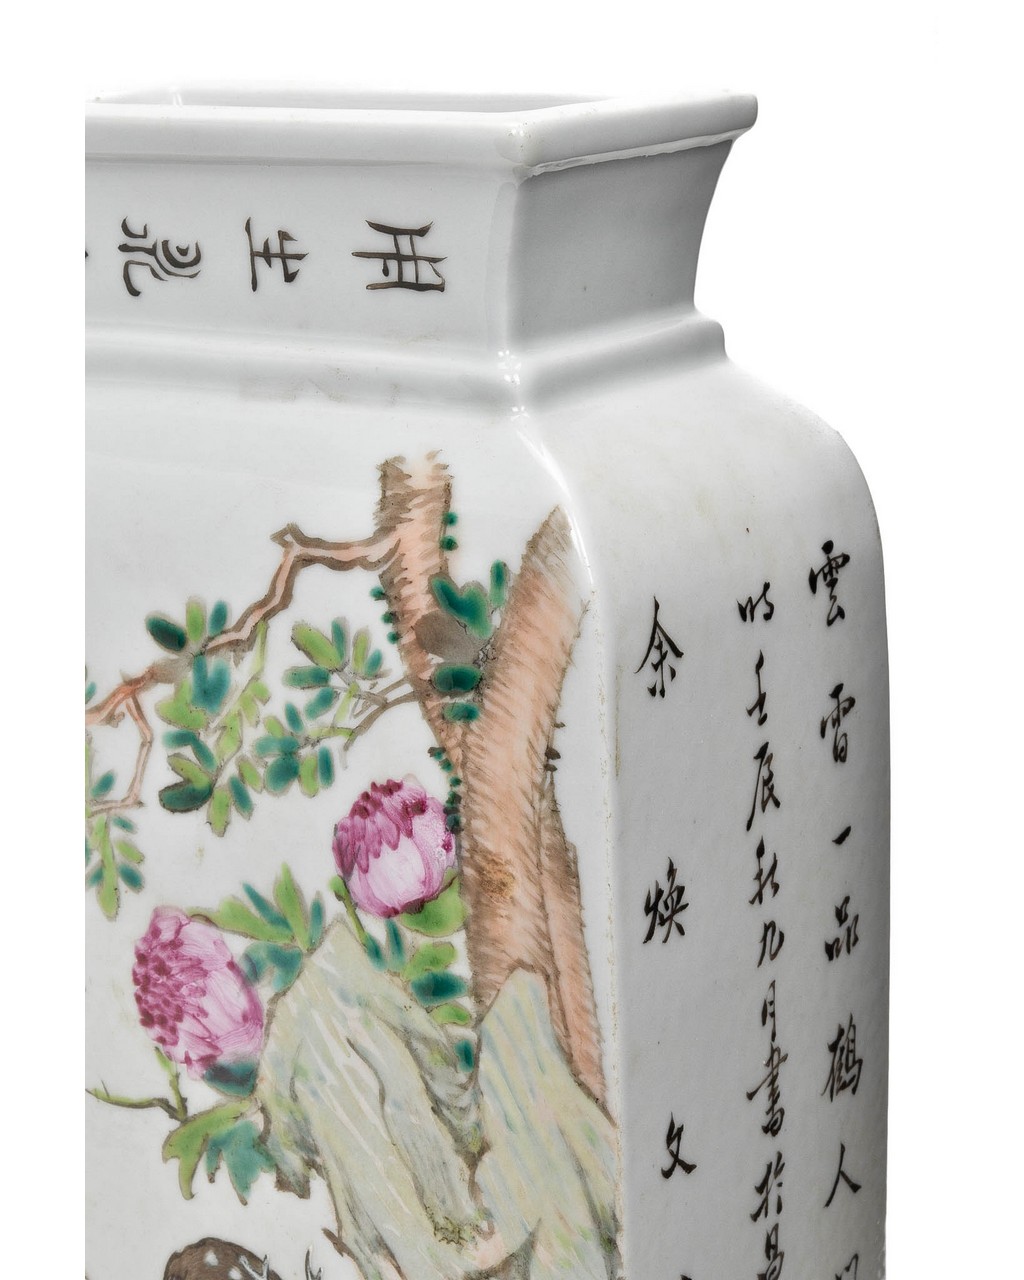 CHINESE PORCELAIN VASE WITH CALIGRAPHY - Image 6 of 6